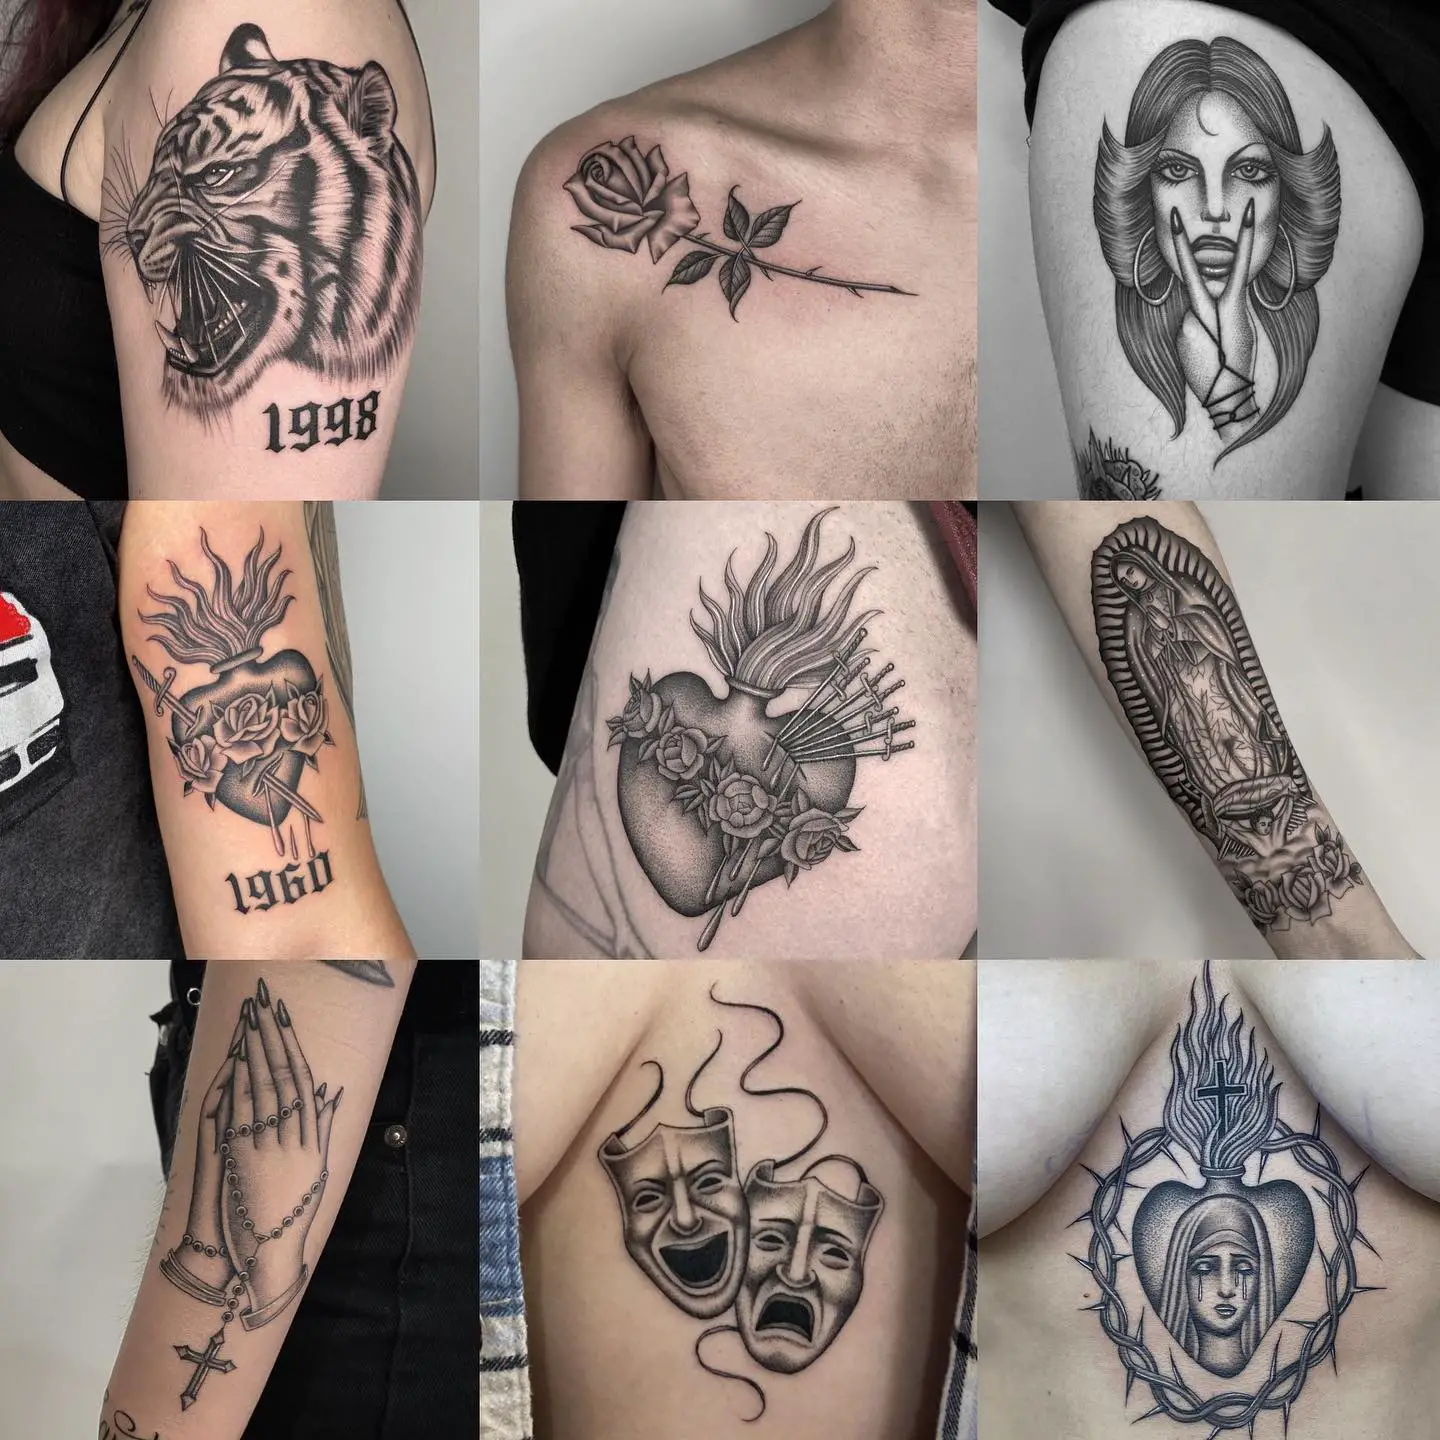 14 Top-Ranking Tattoo shops in Illinois with Masterful Artists